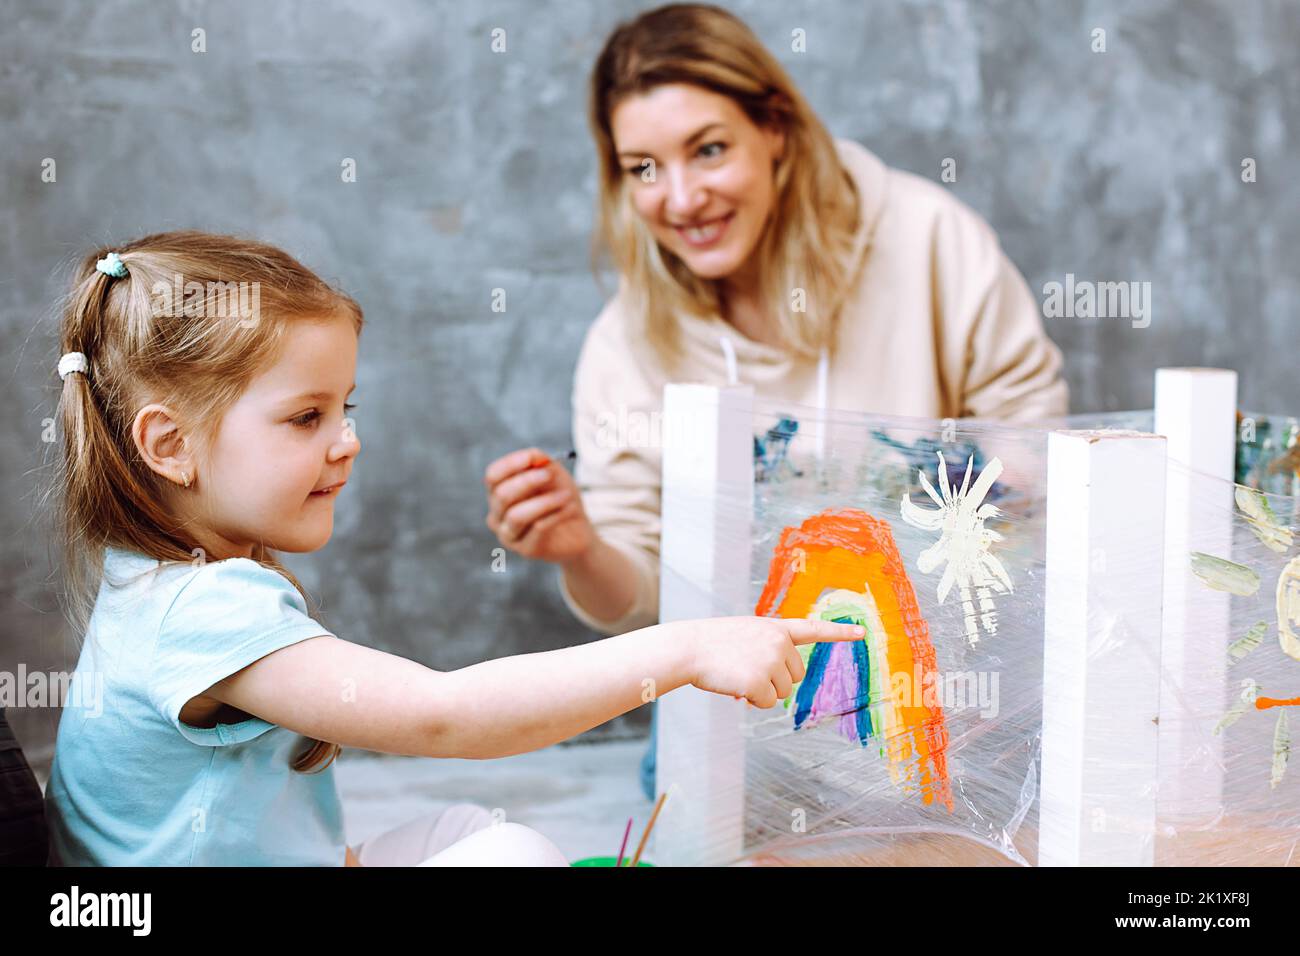 Female teacher with little blonde girl painting rainbow on oilcloth. Fun learning in kid development childcare center Stock Photo